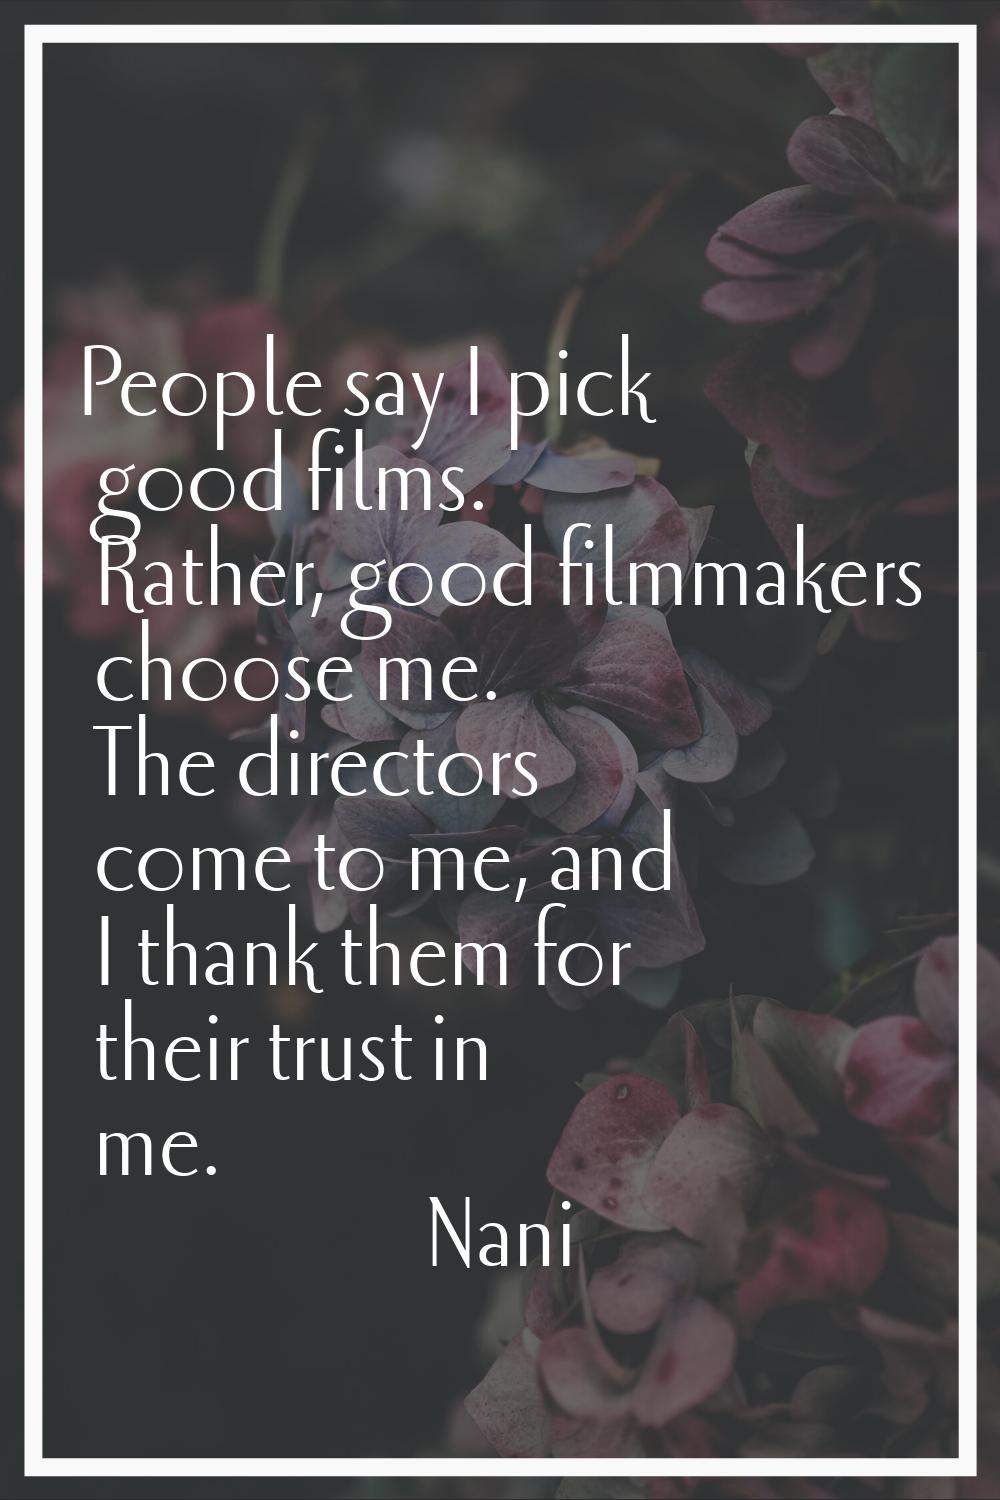 People say I pick good films. Rather, good filmmakers choose me. The directors come to me, and I th